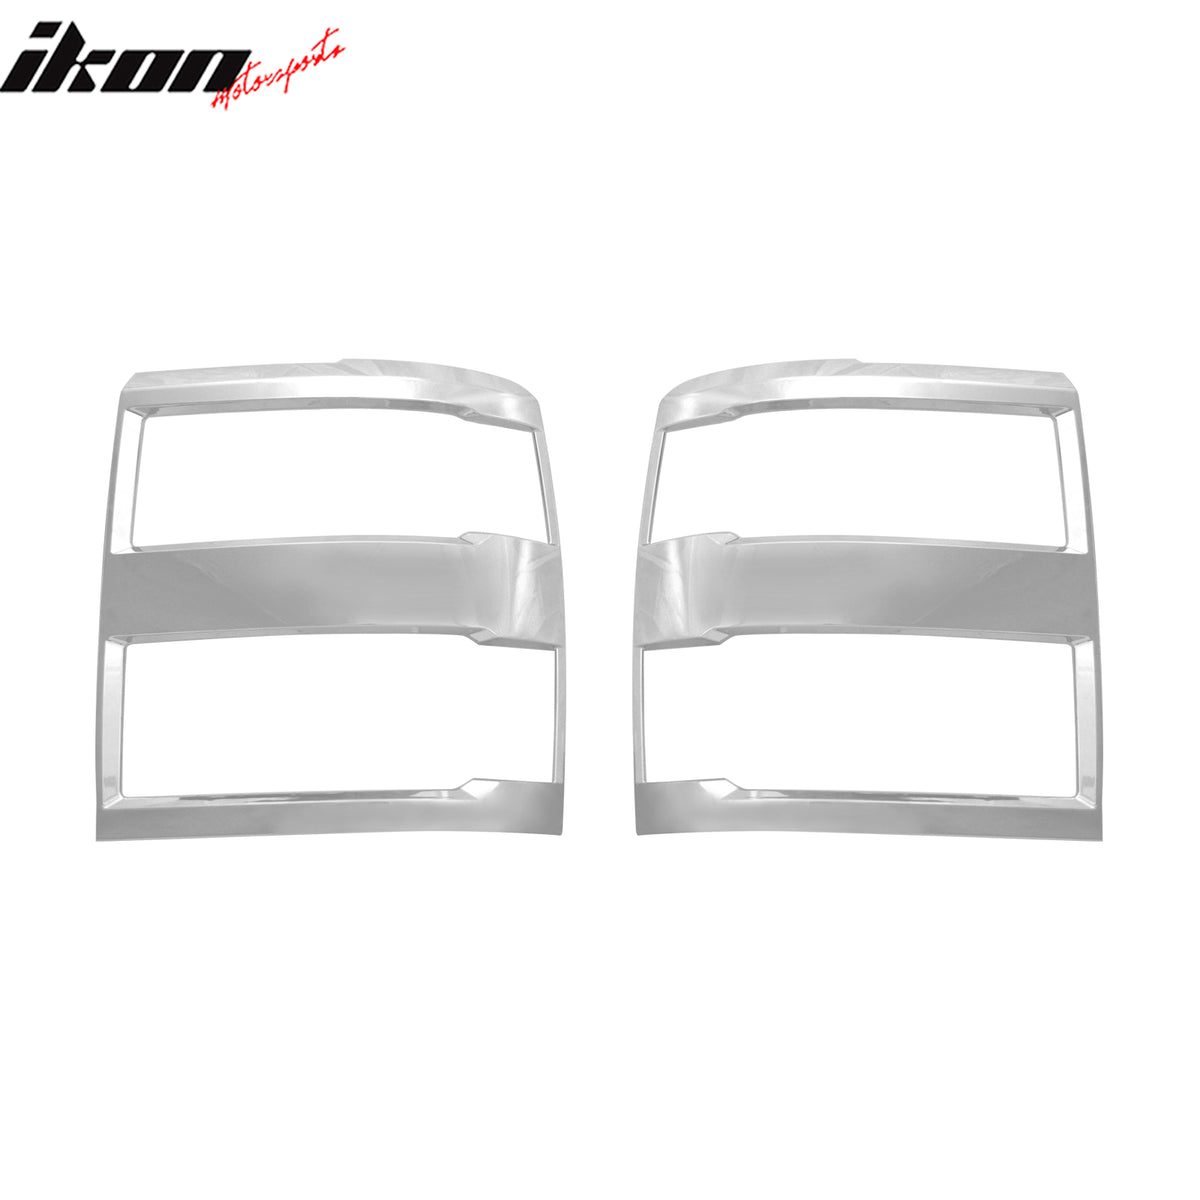 IKON MOTORSPORTS, Headlight Bezel Compatible with 2014-2015 Chevrolet Silverado 1500, Chrome ABS Front Head Lights Lamps Exterior Cover Frames Accessories Pair